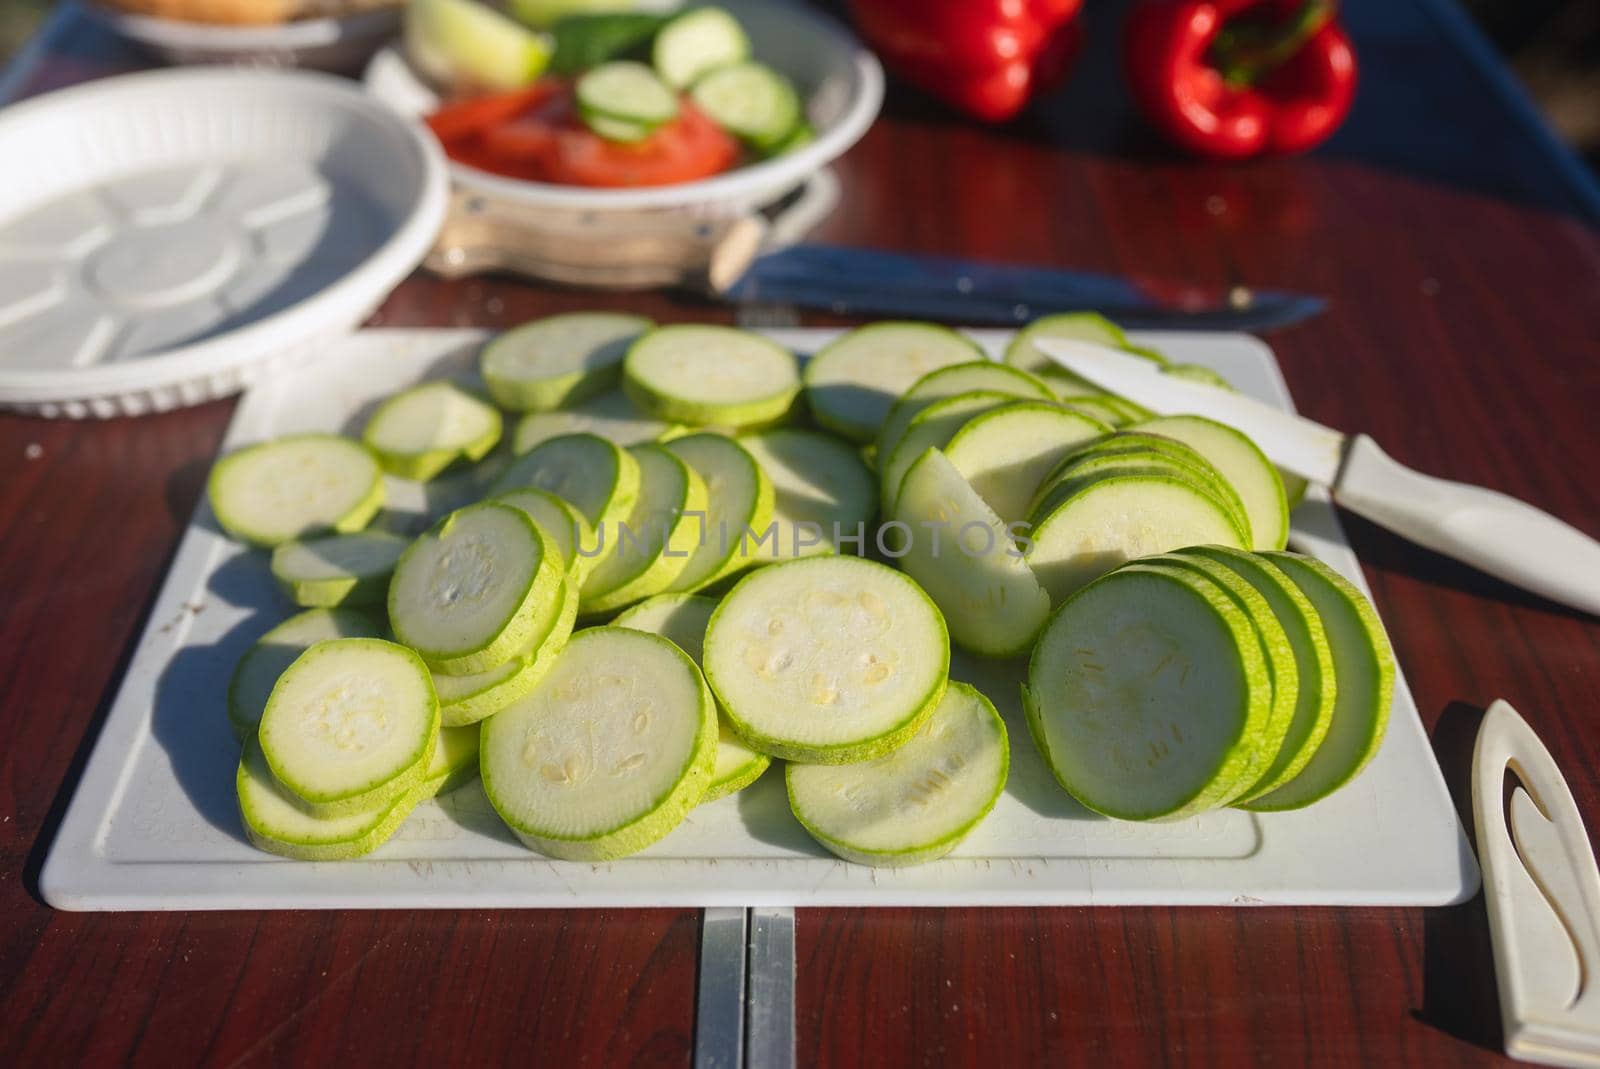 Whole and sliced fresh zucchini on wooden table. Healthy vegetarian ingredient